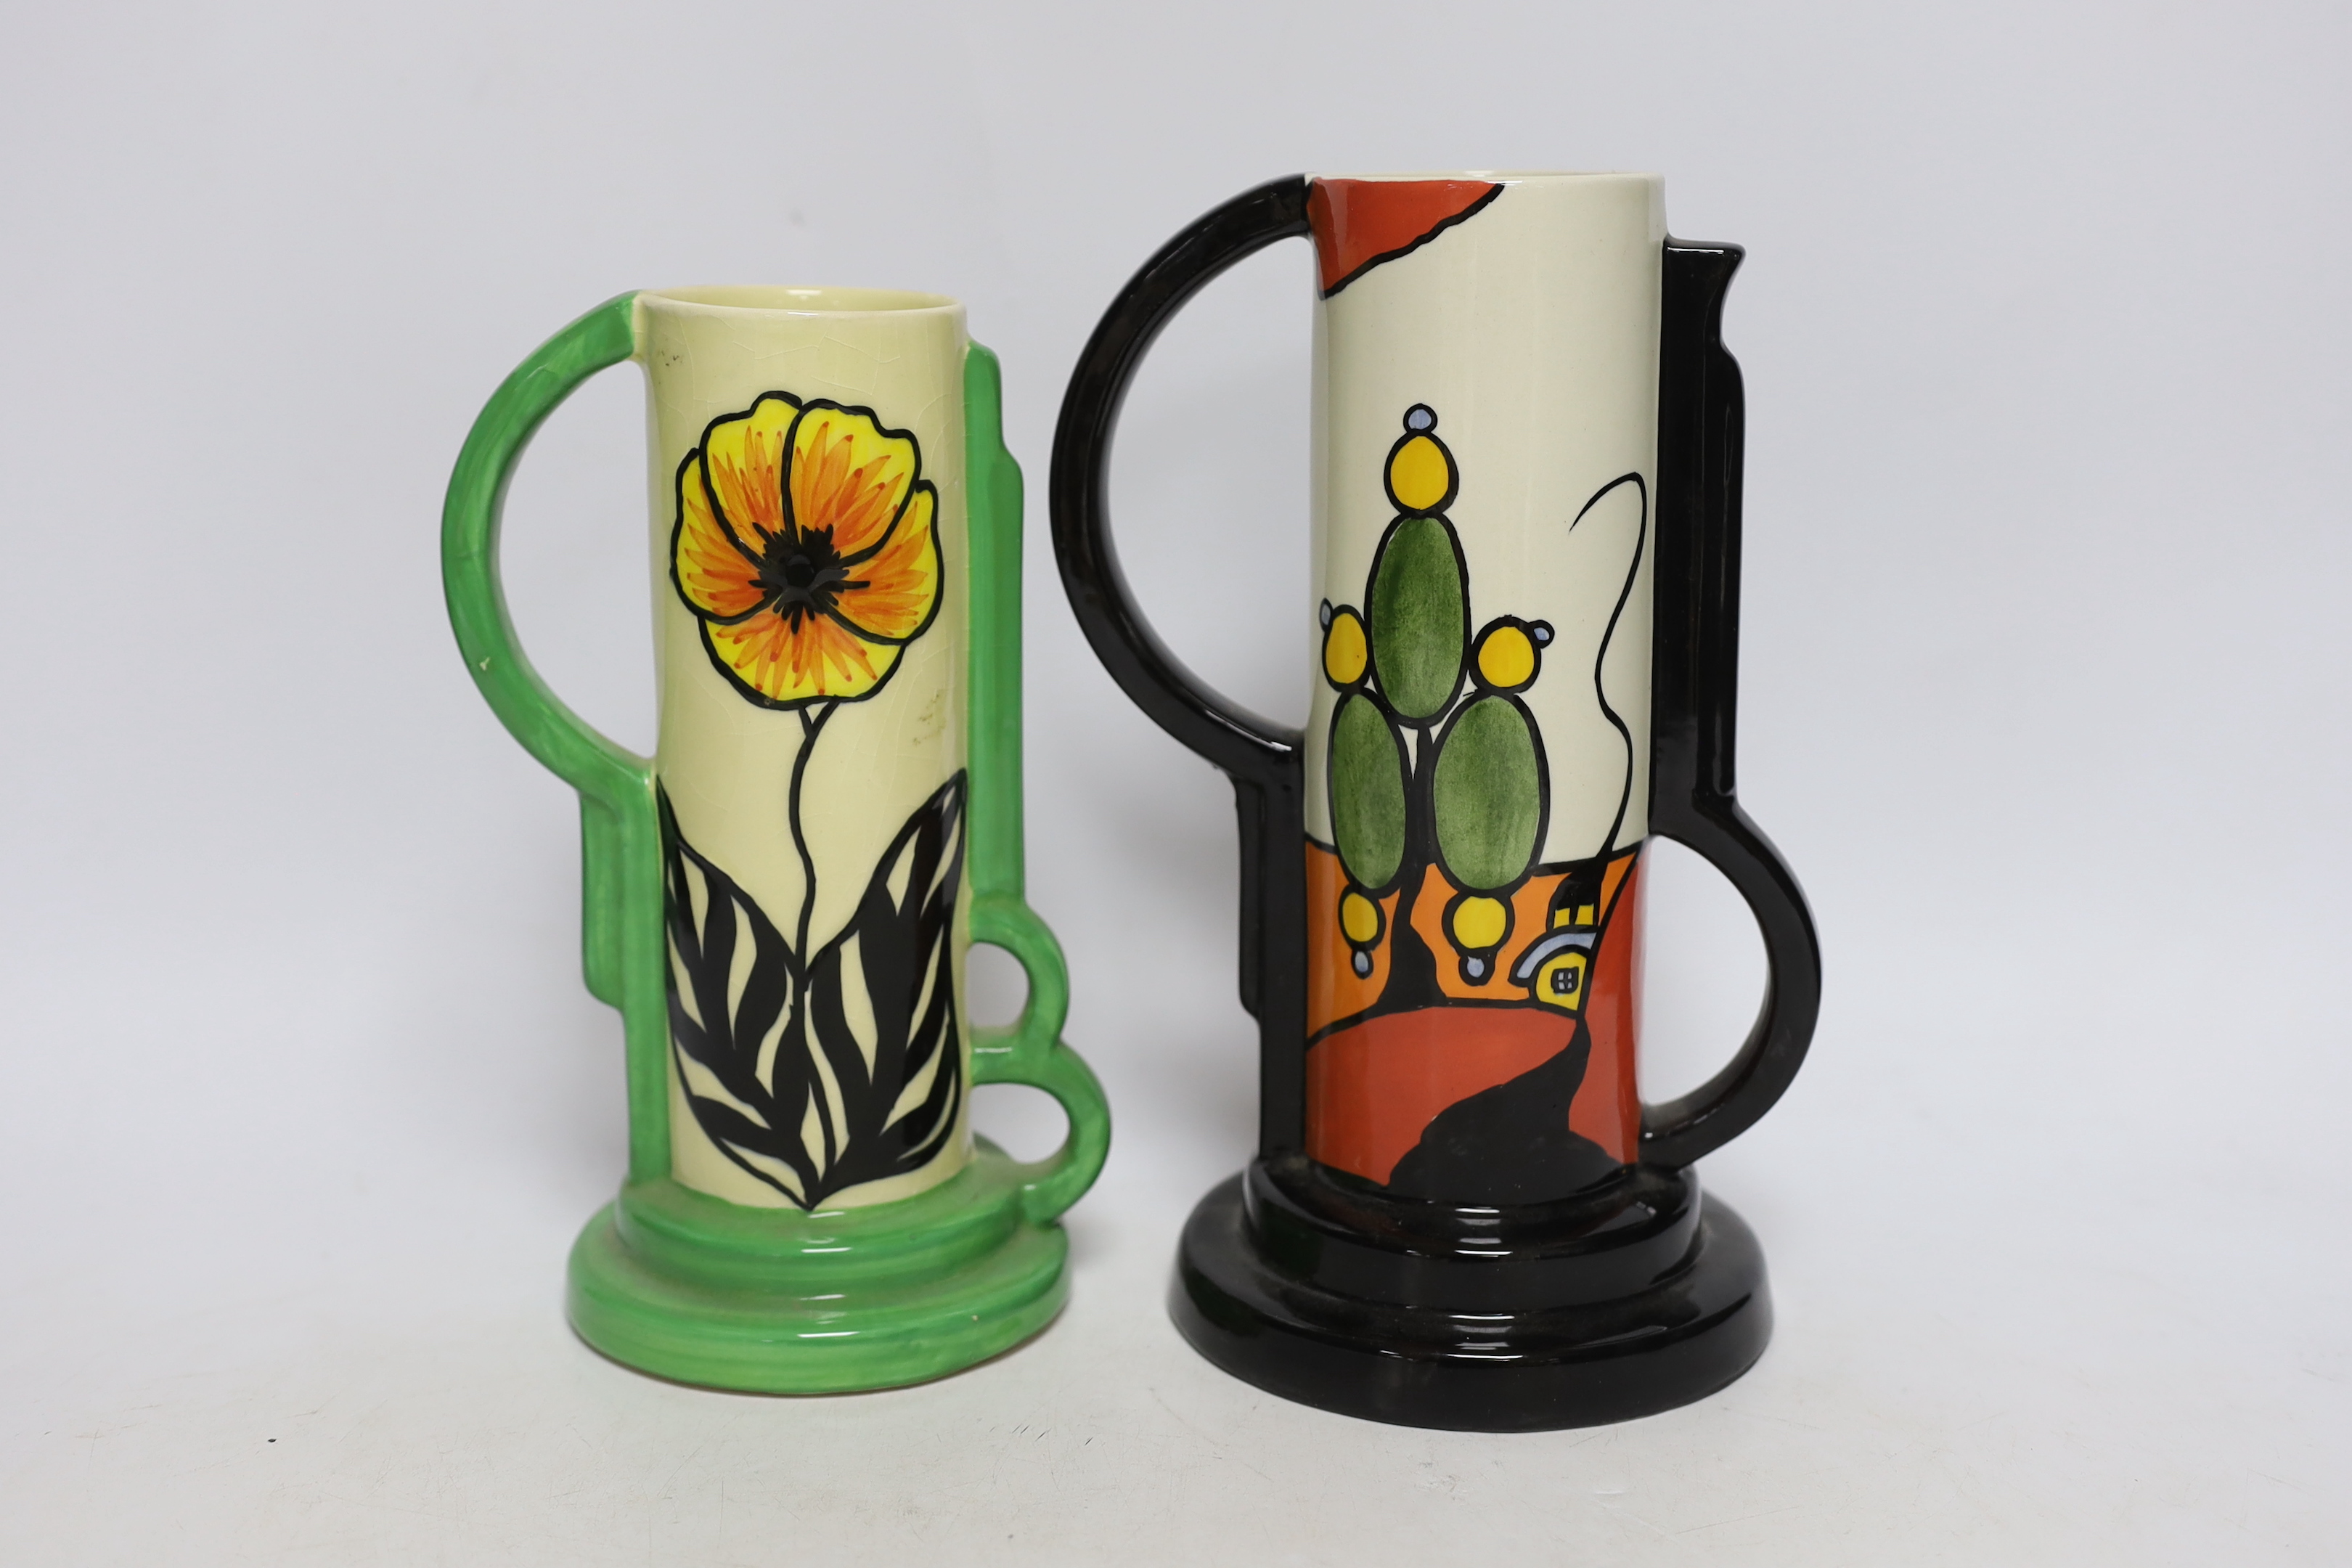 A Bernadette Eve “Orchard” jug, hand painted by Bernadette Eve and an Old Ellgreave “Marshland Cottage” jug, hand painted by Lorna Bailey, both in Clarice Cliff style, tallest 23.5cm